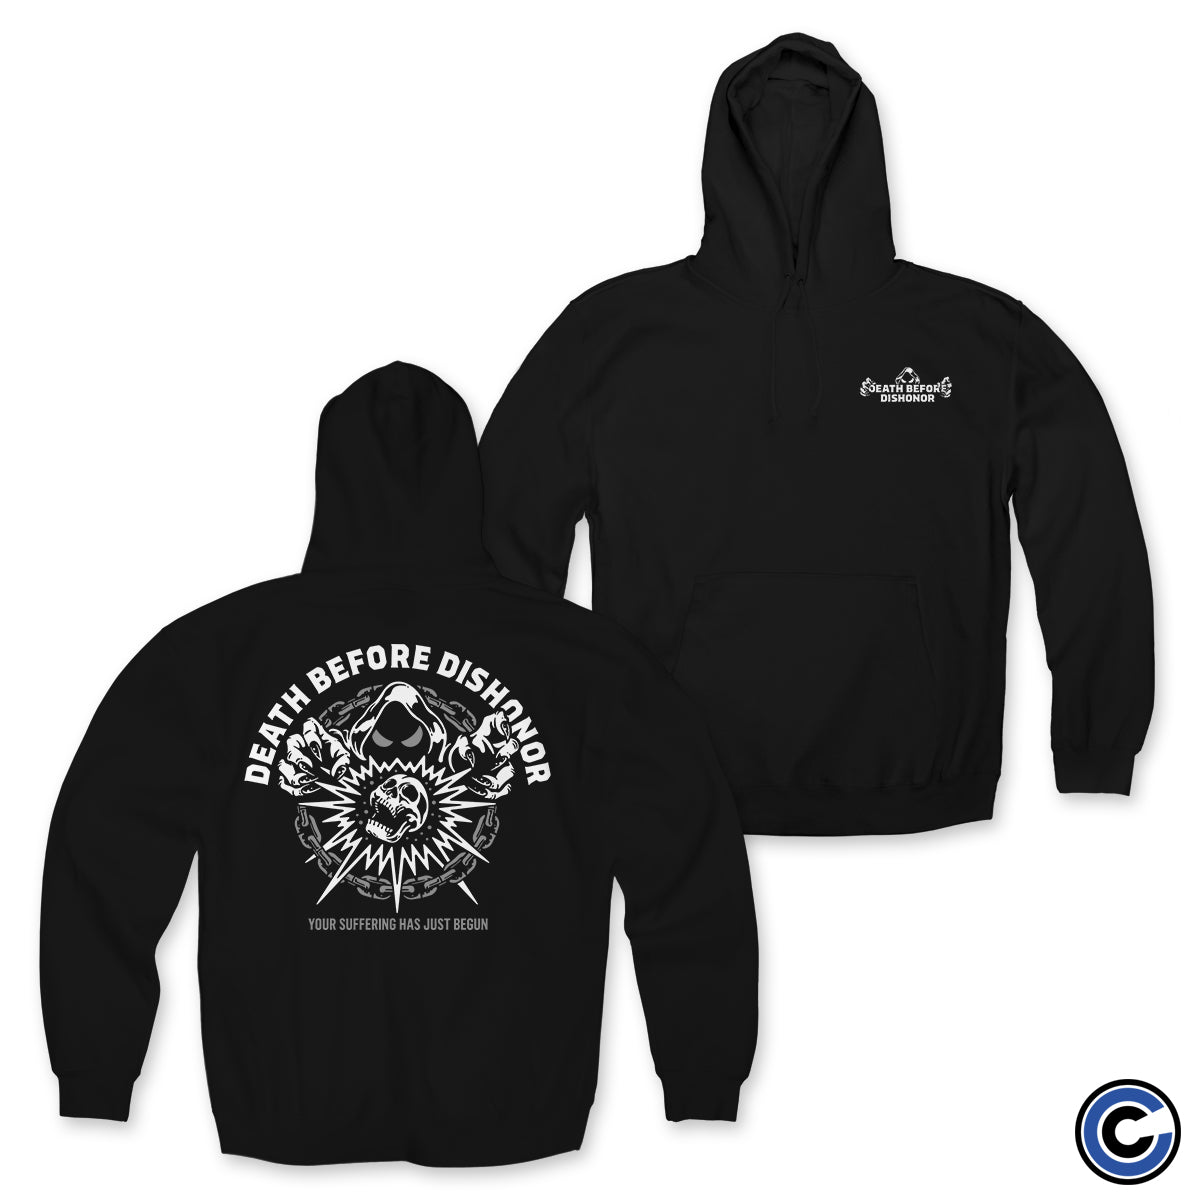 Death Before Dishonor "Your Suffering" Hoodie